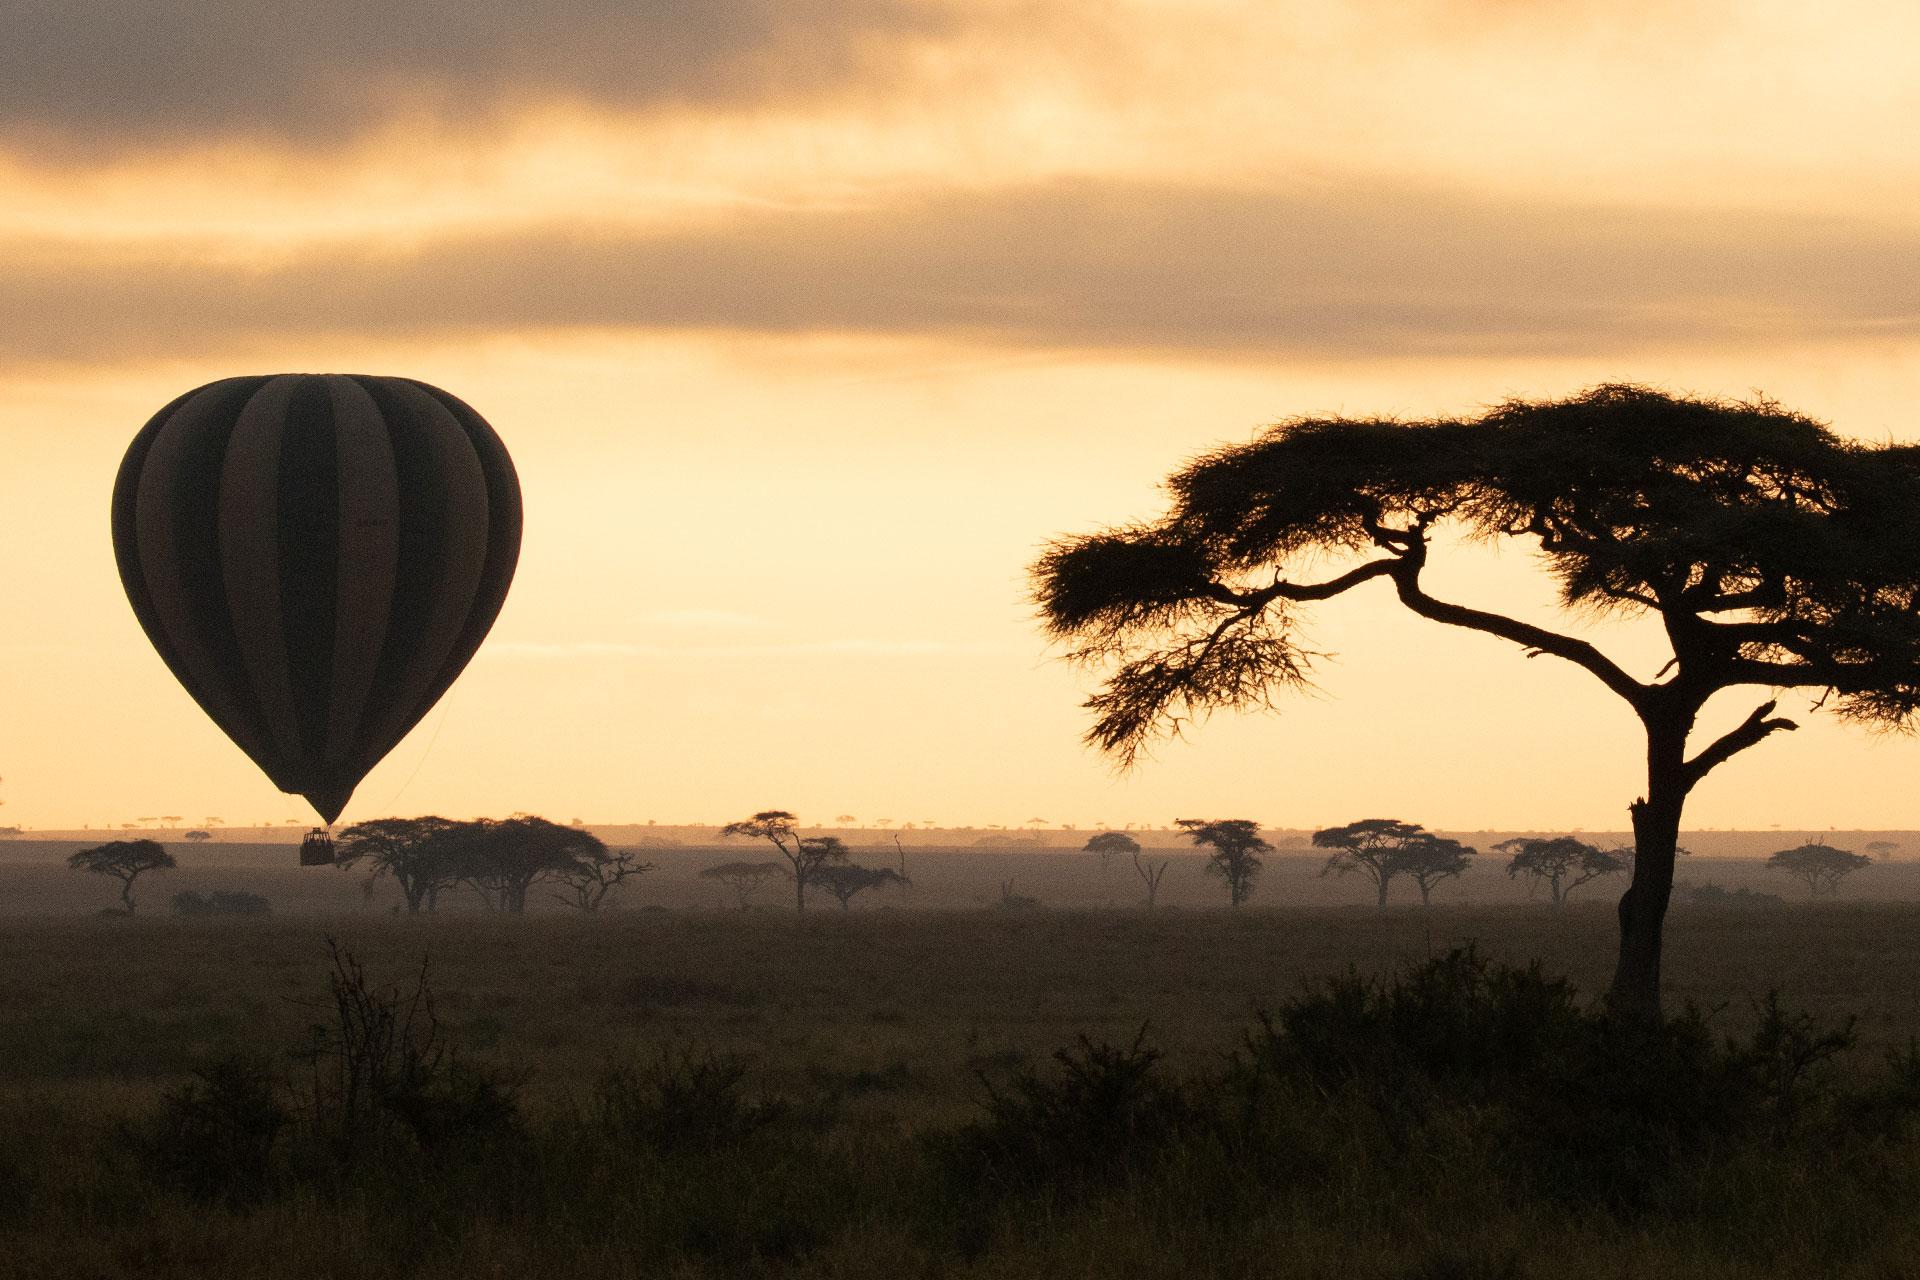 Balloon flight very early in the morning over the Serengeti